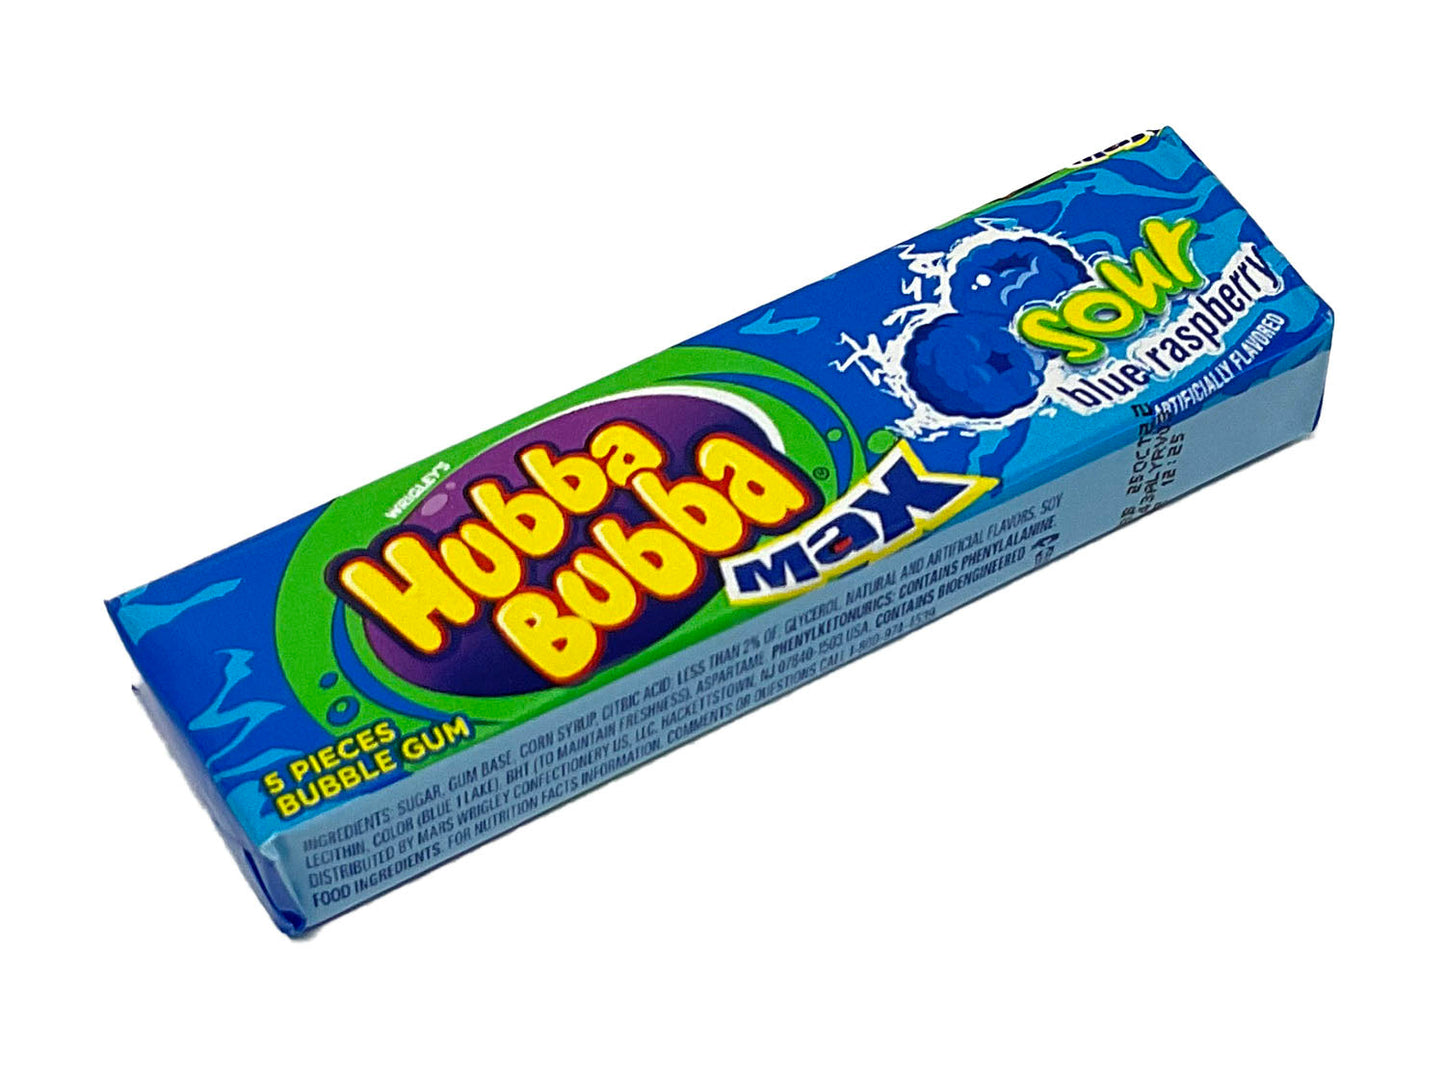 HUBBA BUBBA Sour Blue Raspberry Bubble Chewing Gum Tape, 2 ounce (6 Pack)